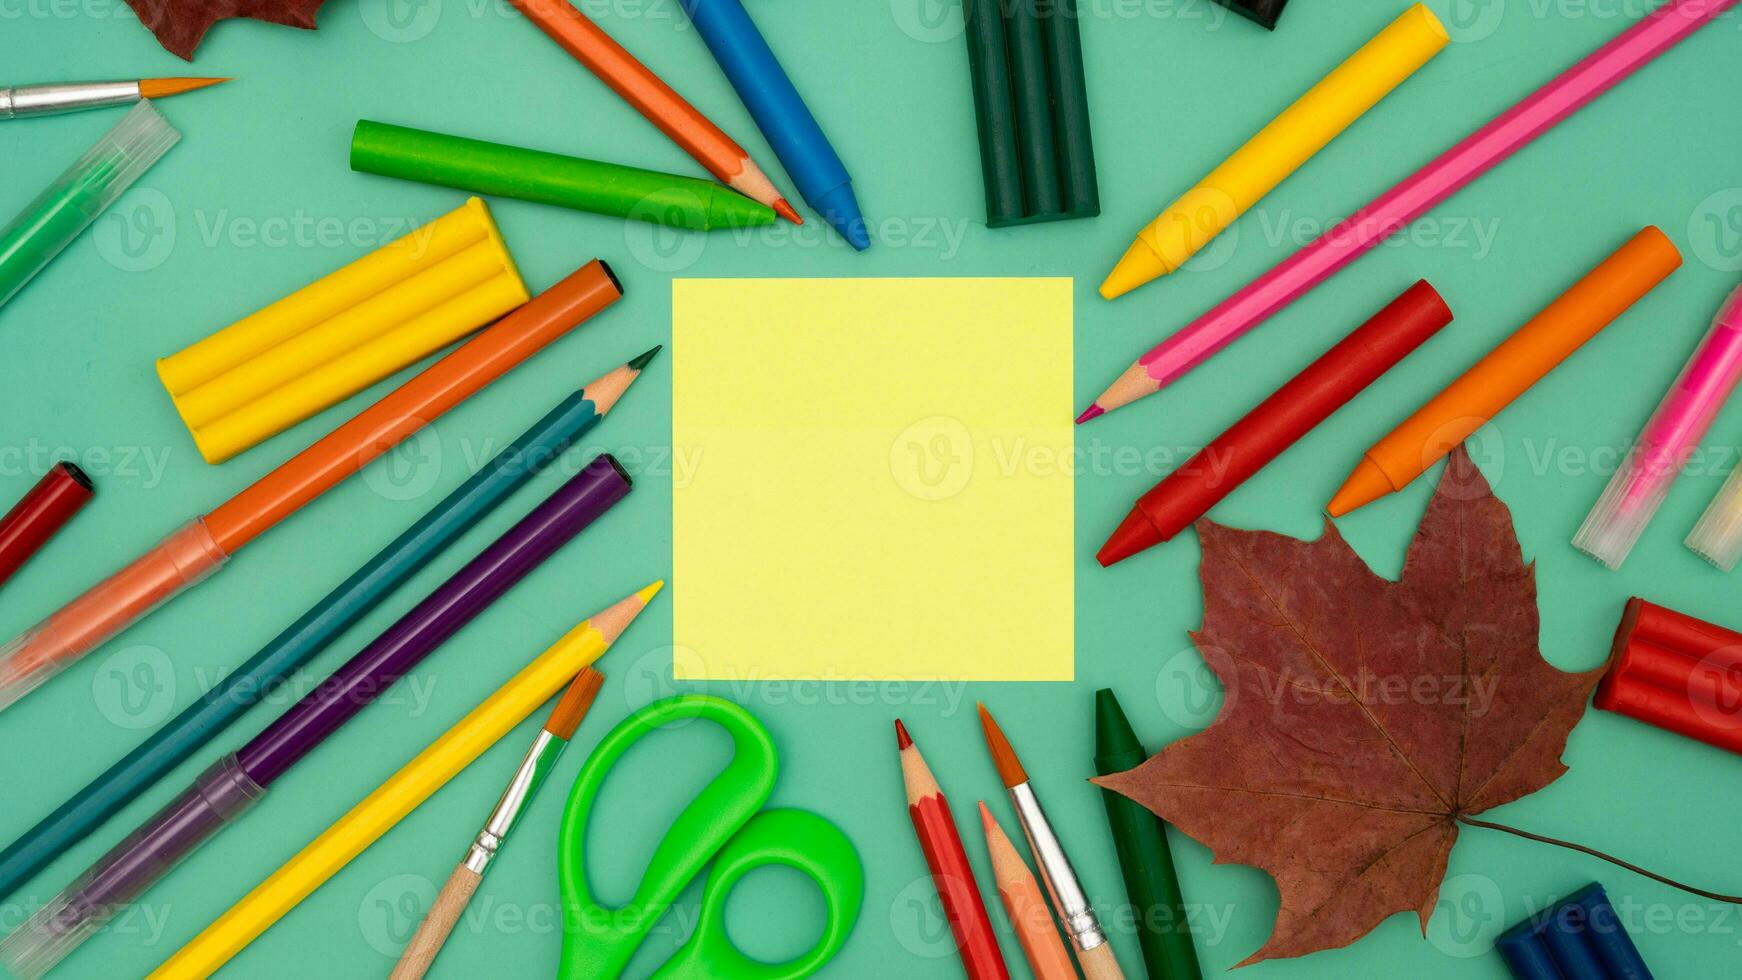 Back to school soon. buying stationery, flatley, a place to copy your text or advertising on a bright sticker. Bright background. photo